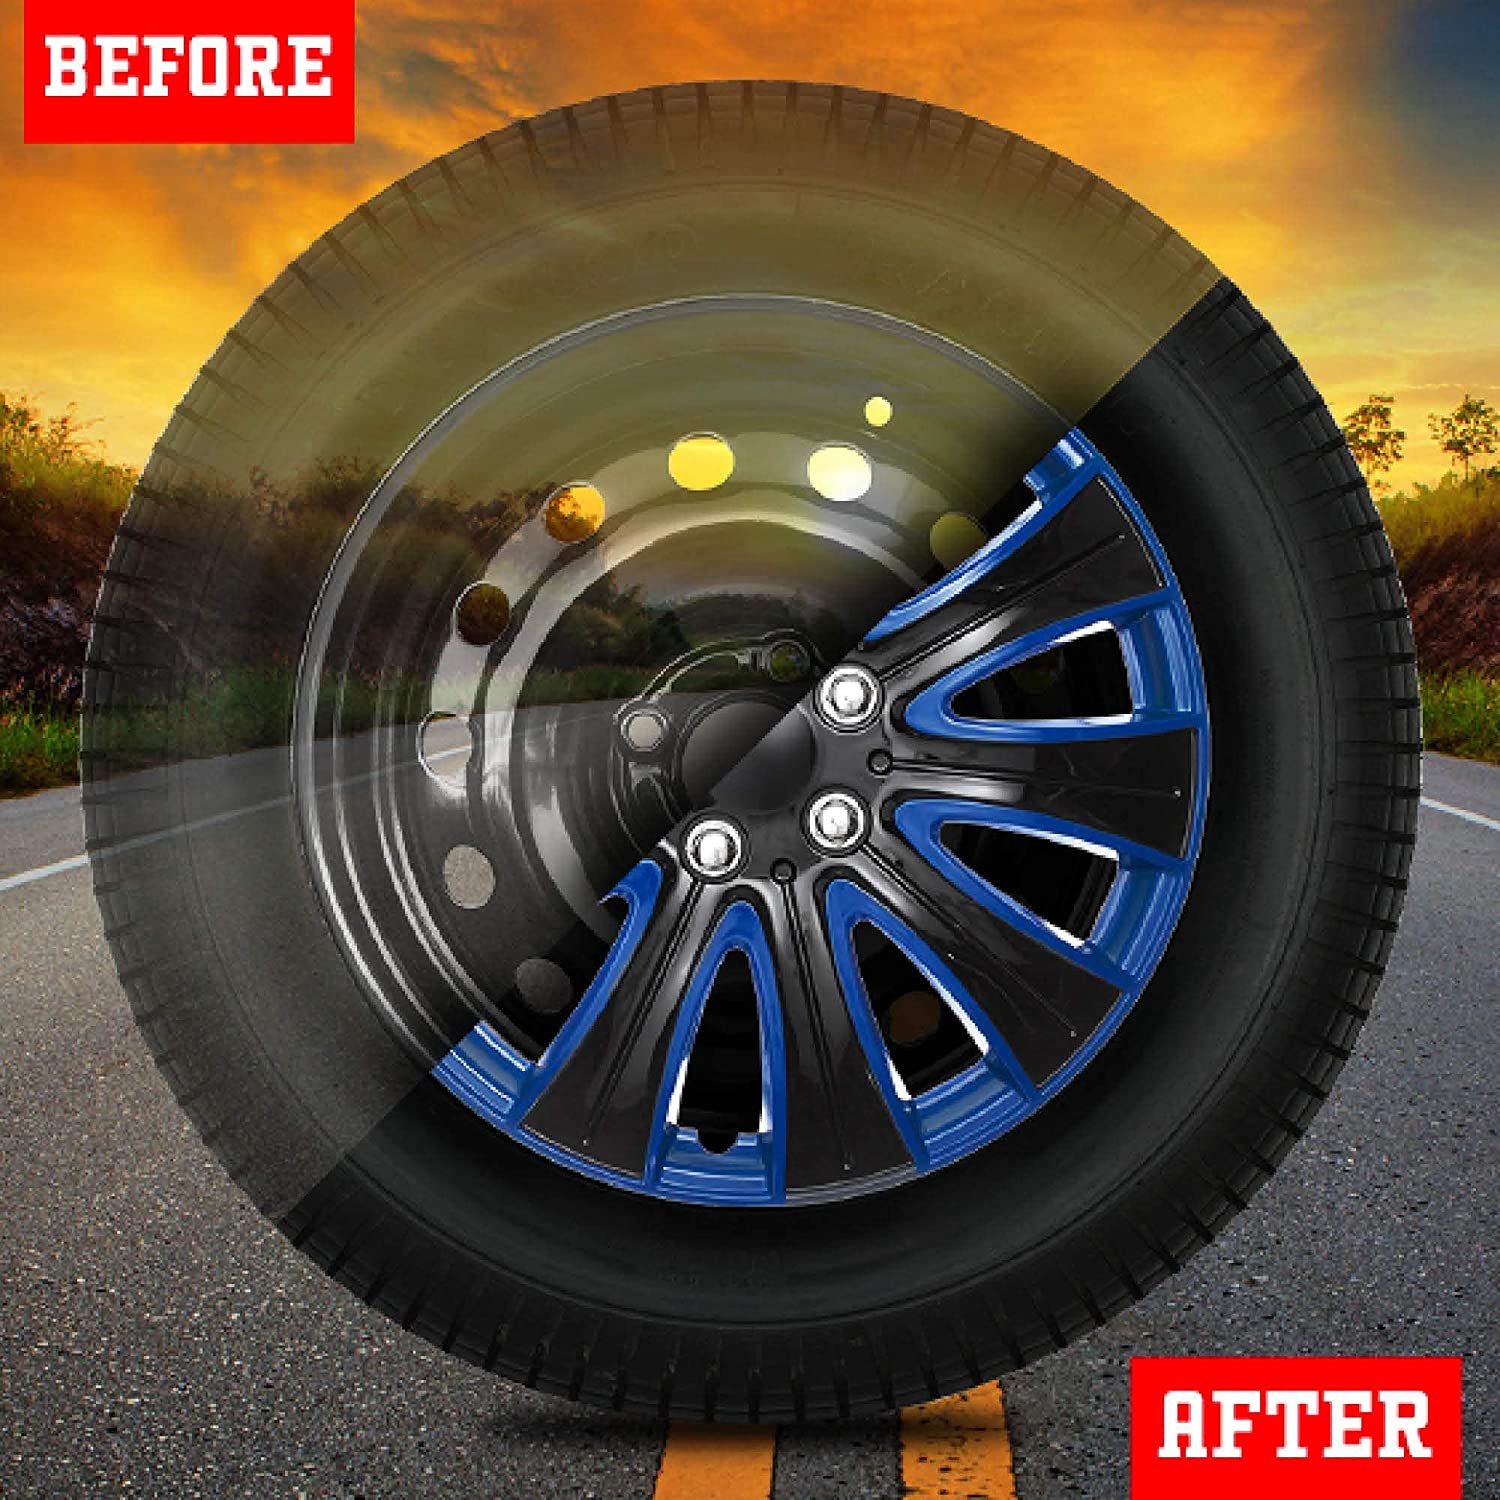 Swiss Drive Hubcap 15 Inch Set of Luxurious Black and Blue Design Durable  and Reliable Automotive Wheels Easy to Install Car Wheel Hubcaps 15-inch 